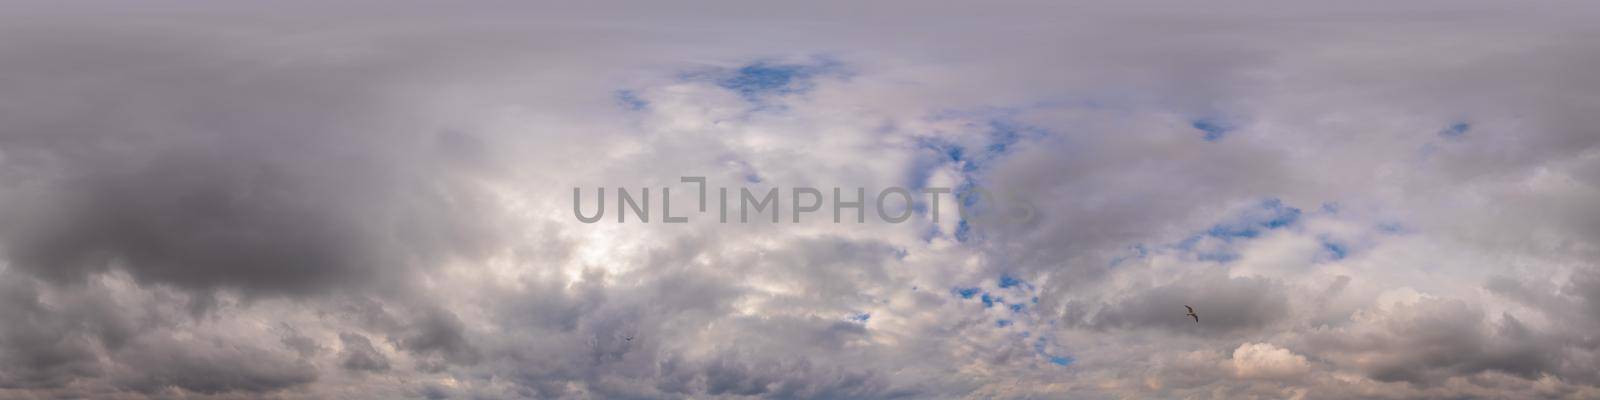 Overcast sky panorama on sunset with Cumulus clouds in Seamless spherical equirectangular format as full zenith for use in 3D graphics, game and aerial drone 360 degree panoramas for sky replacement. by Matiunina